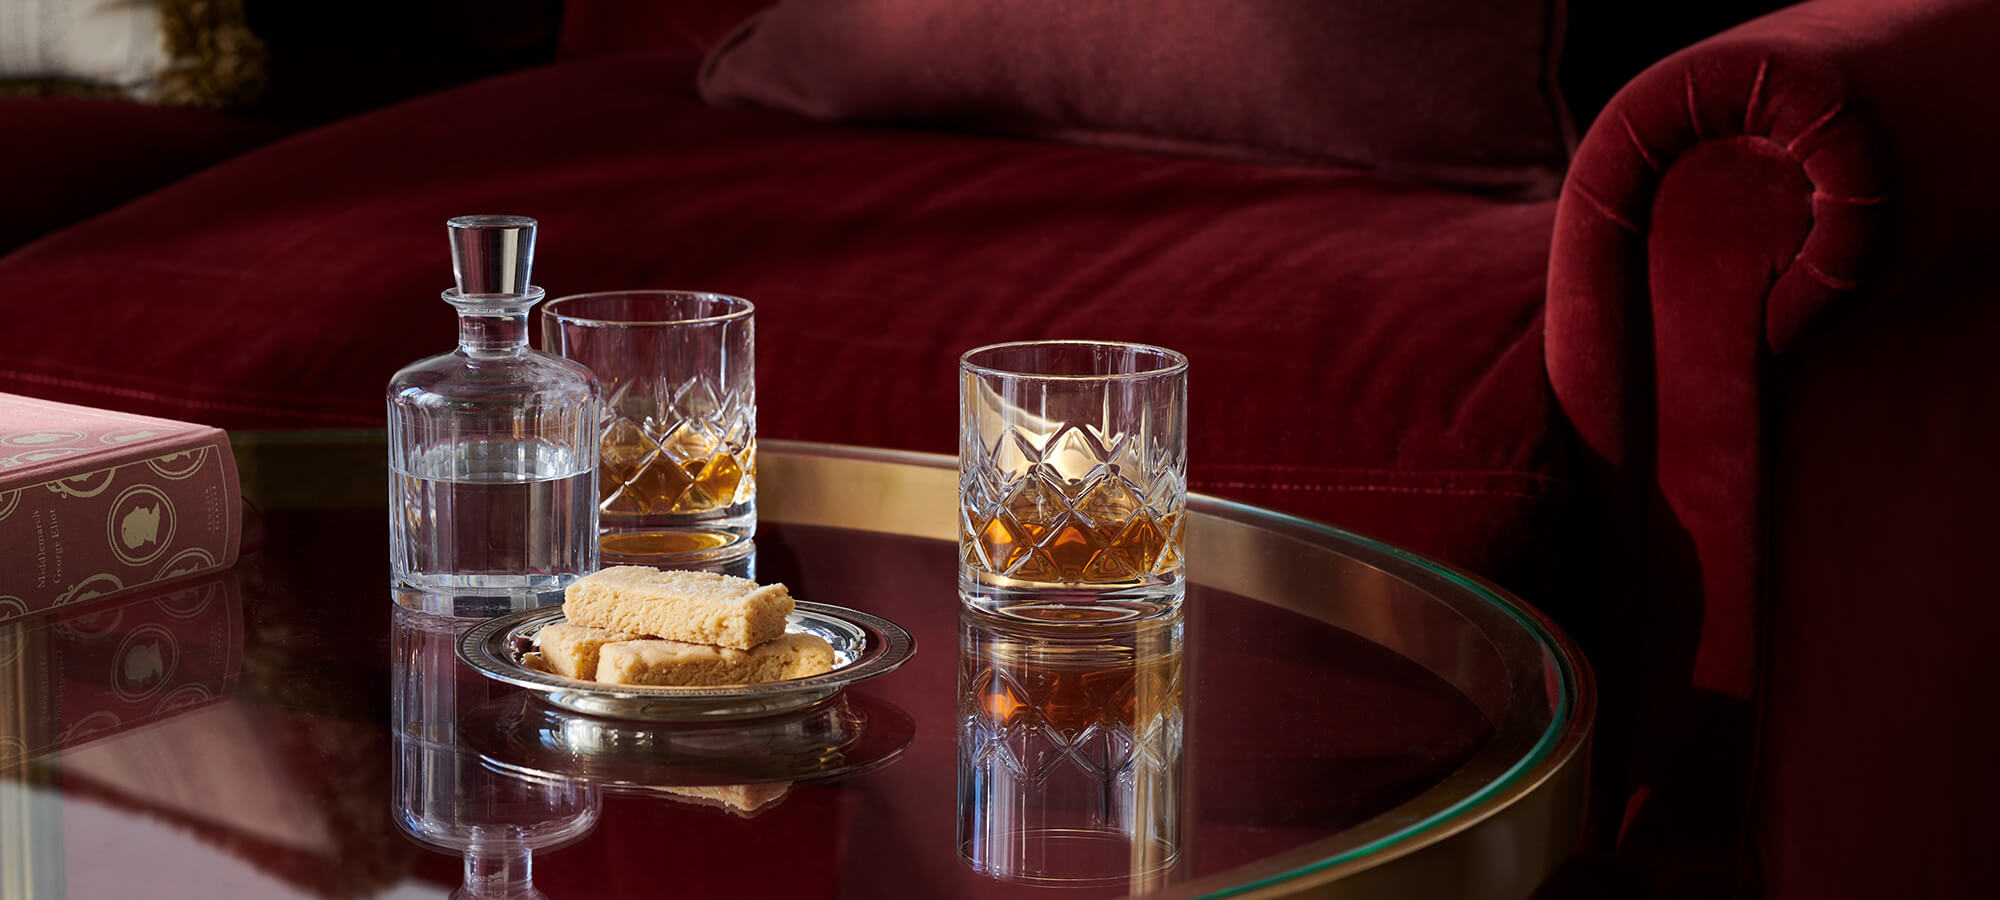 Two crystal glasses of whisky and silver tray of shortbread on a glass table in an Estate Room in Braid House